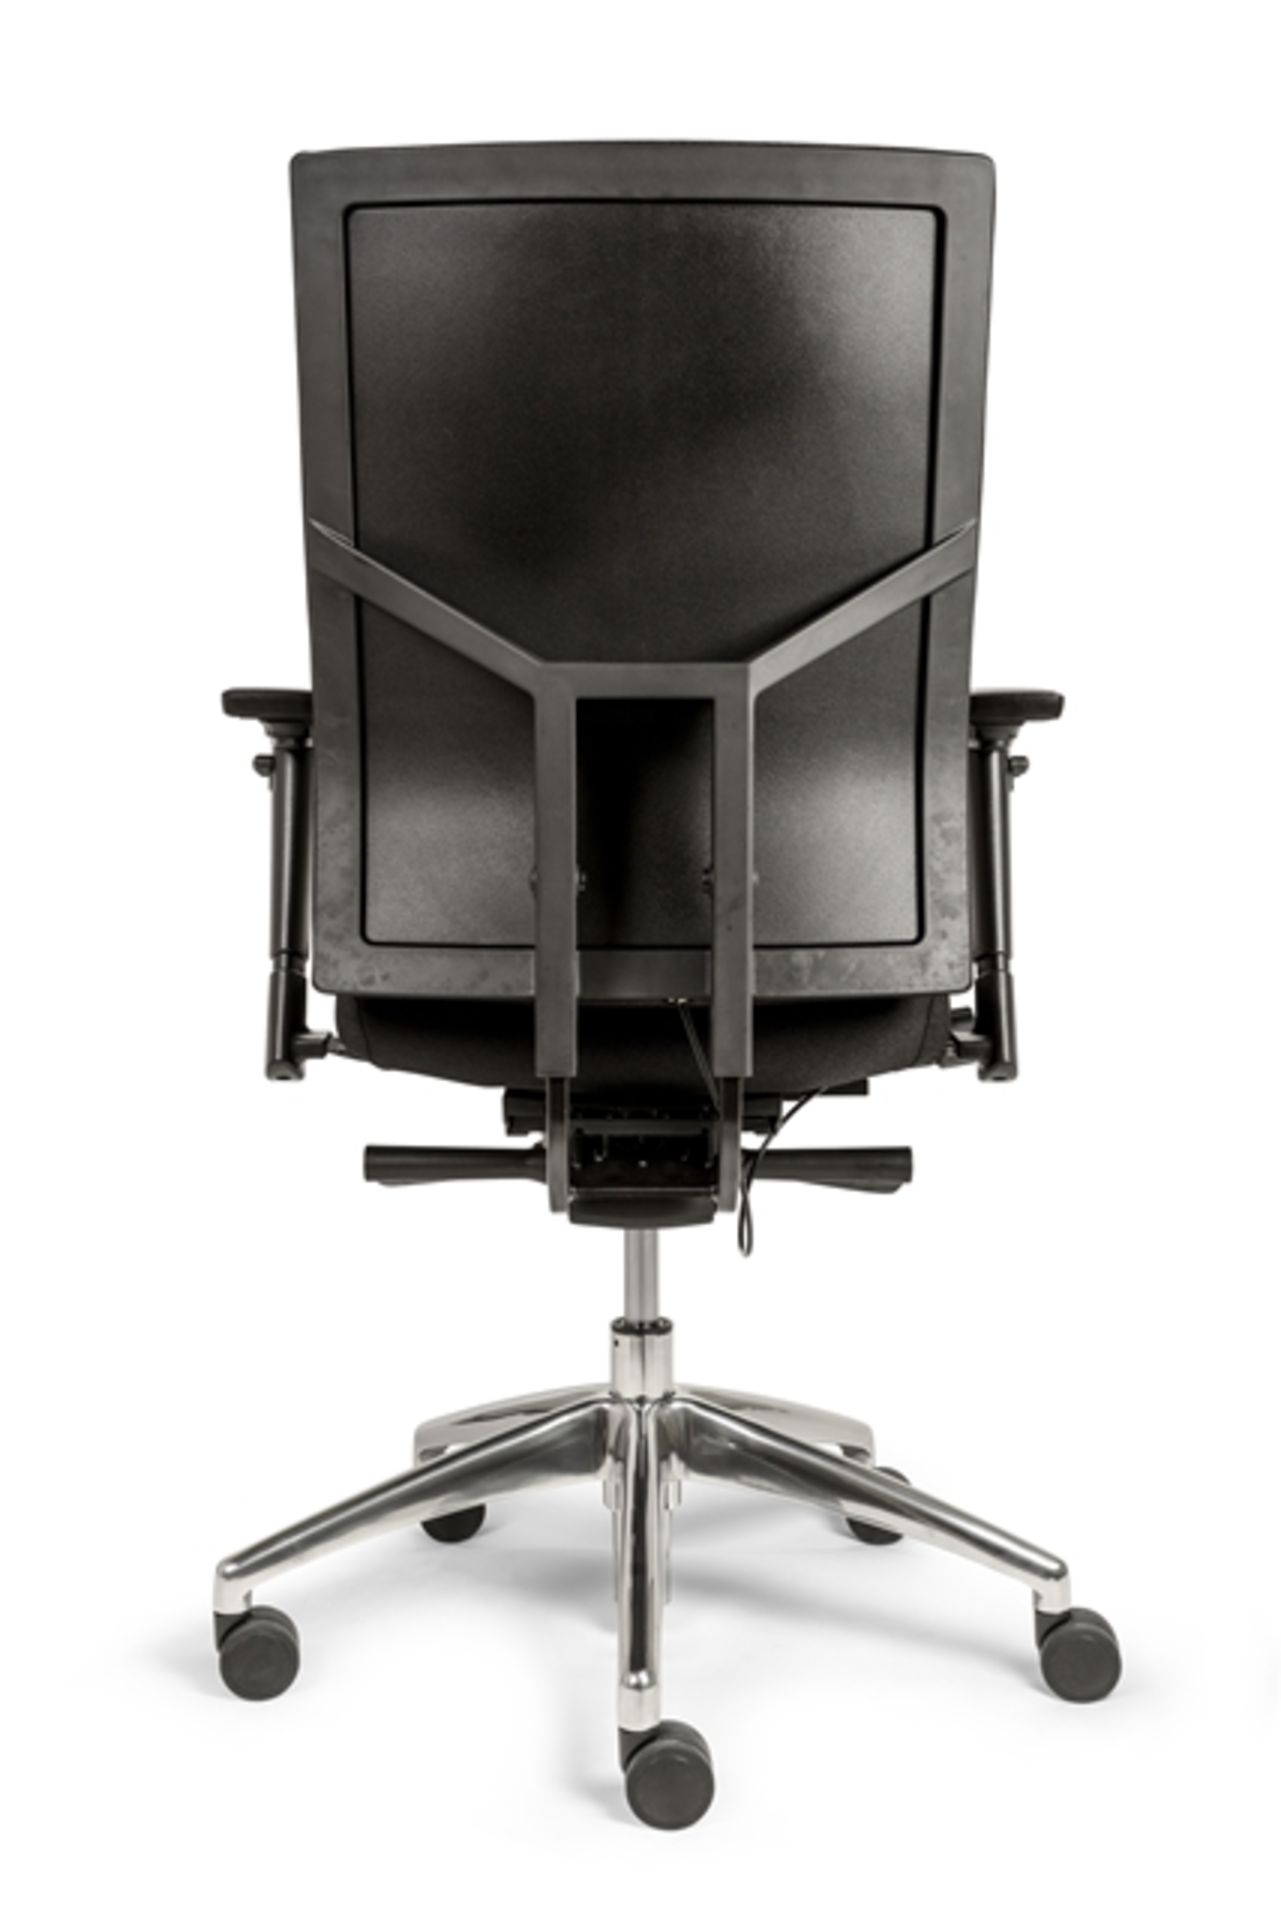 Unused ergonomic fully upholstered office chair in black (RRP £289) located in Stafford, viewing - Image 7 of 7